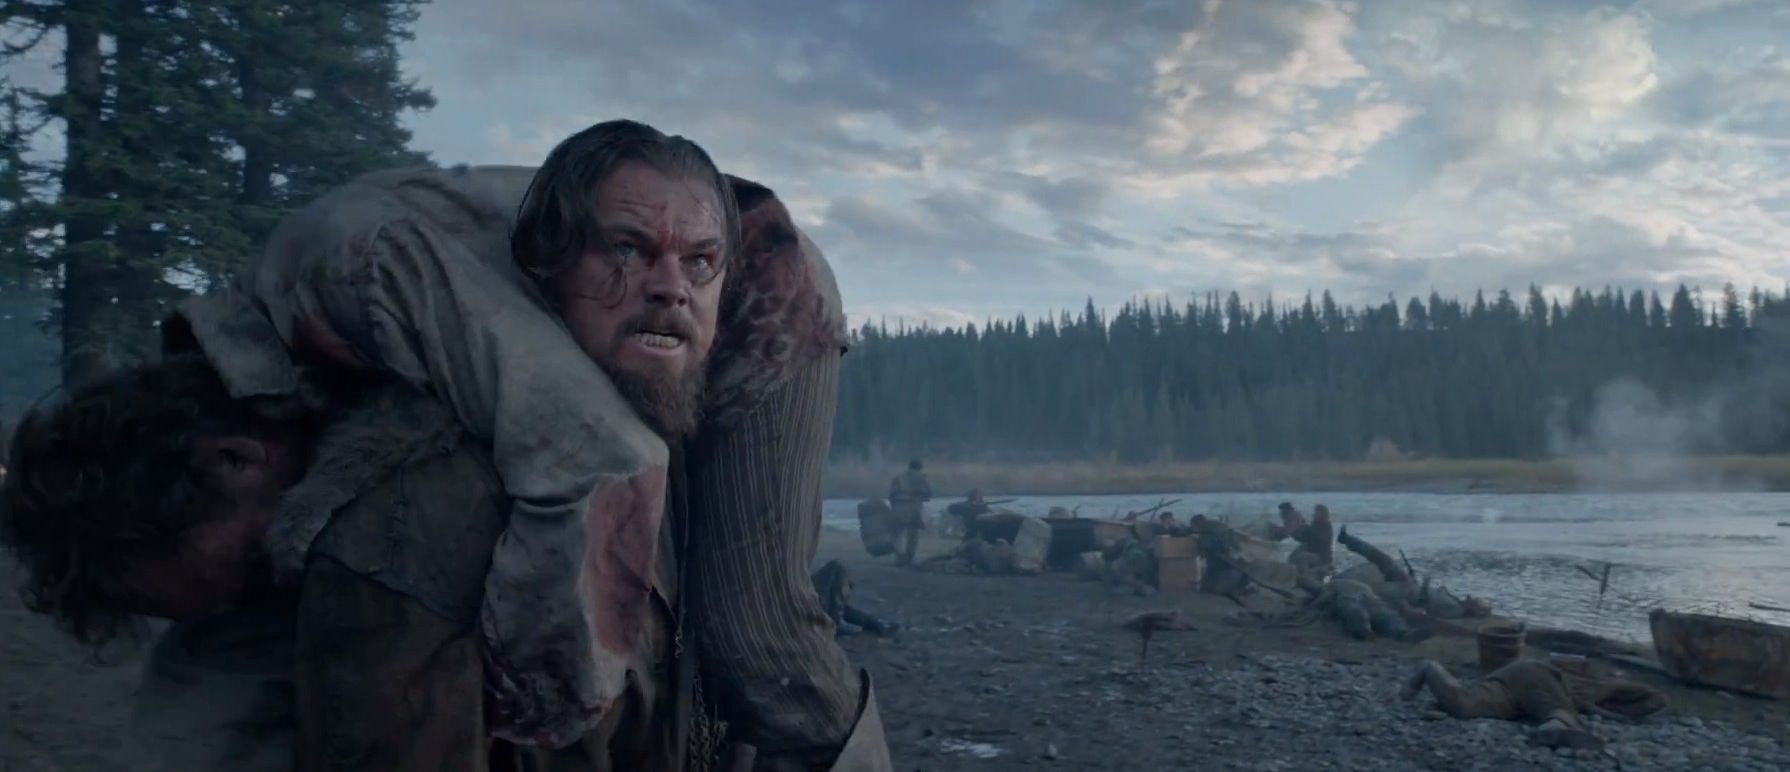 Leonardo DiCaprio carries a man on his back in 'The Revenant